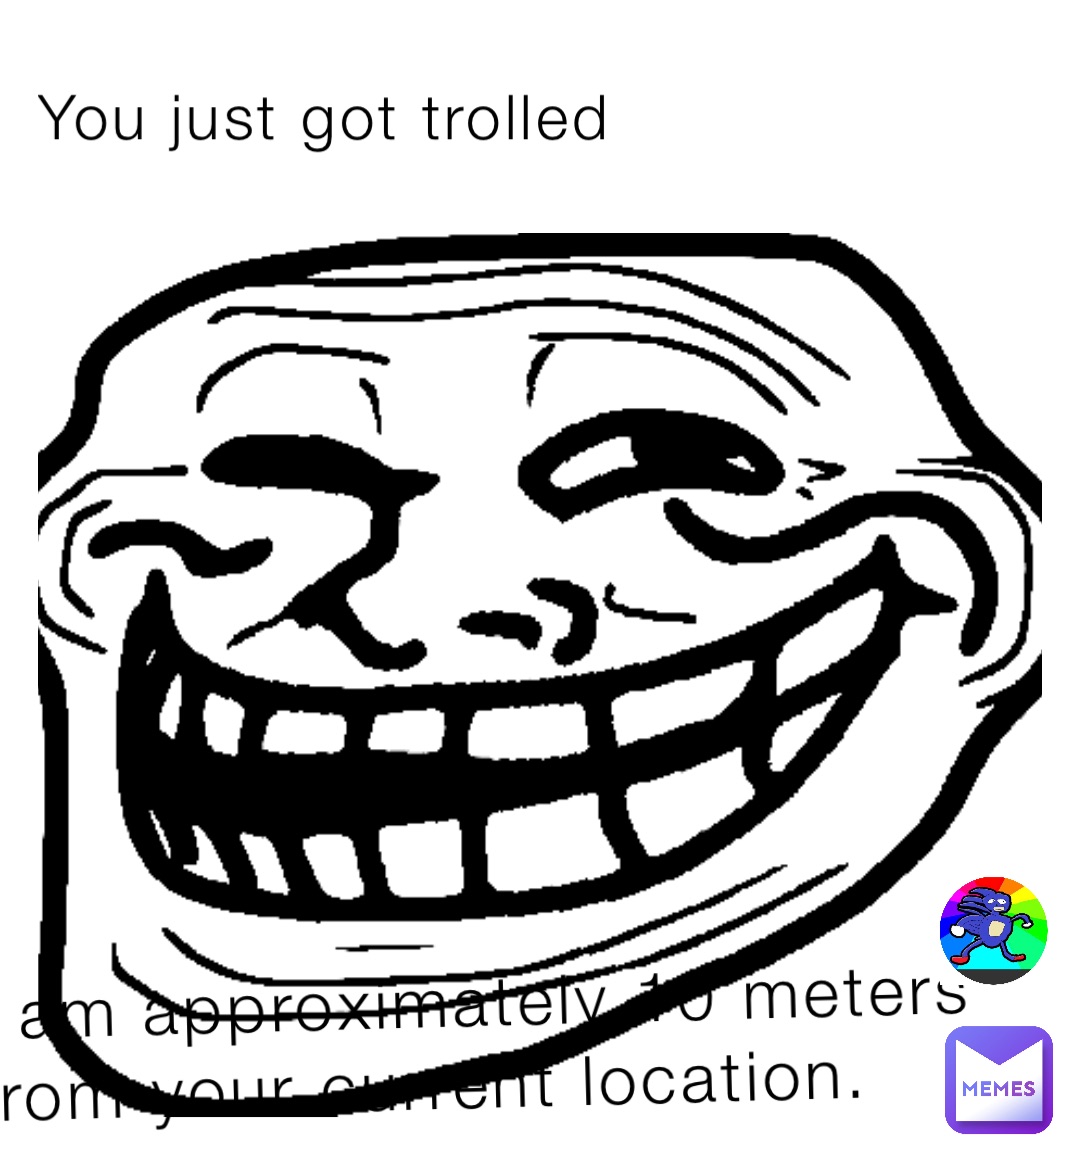 You just got trolled I am approximately 10 meters from your current location.